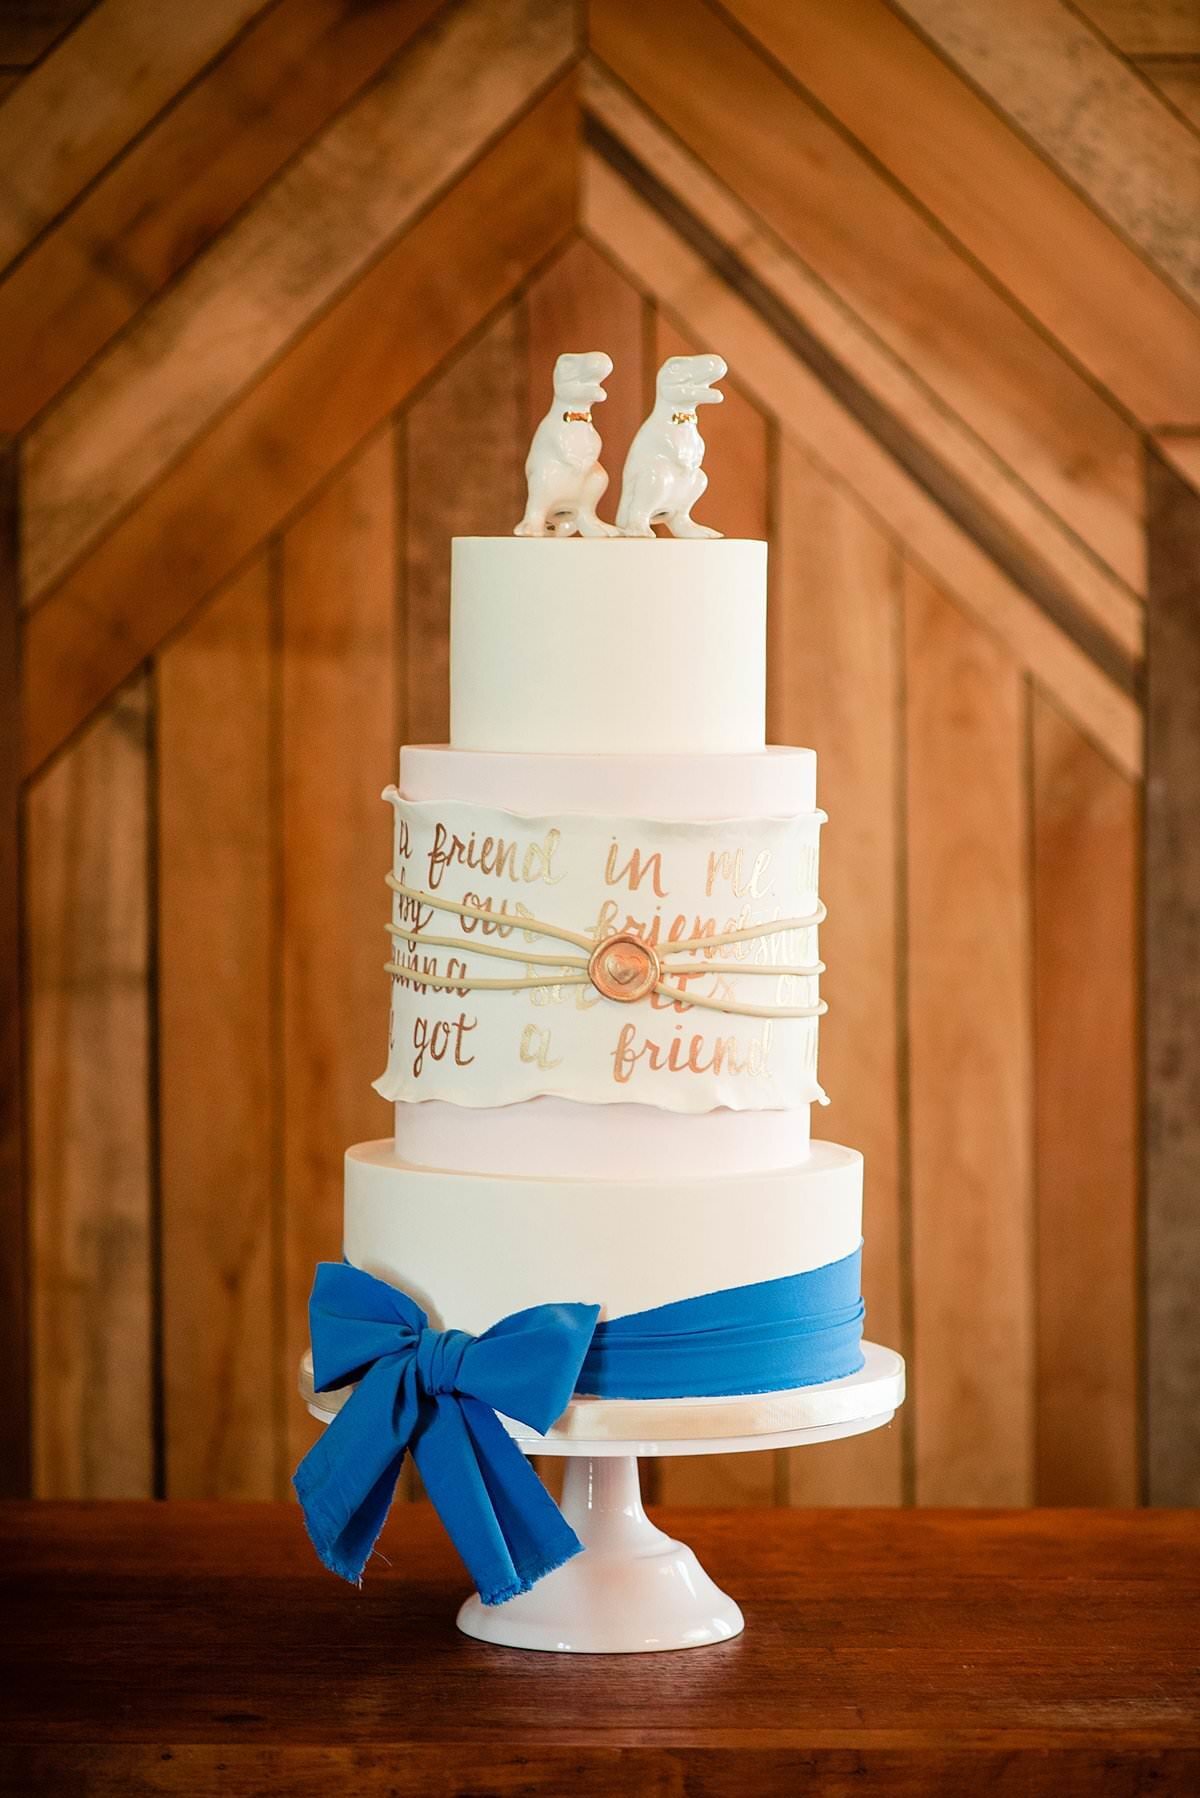 3 Tier Wedding Cake in blush and Ivory inspired by Toy Story